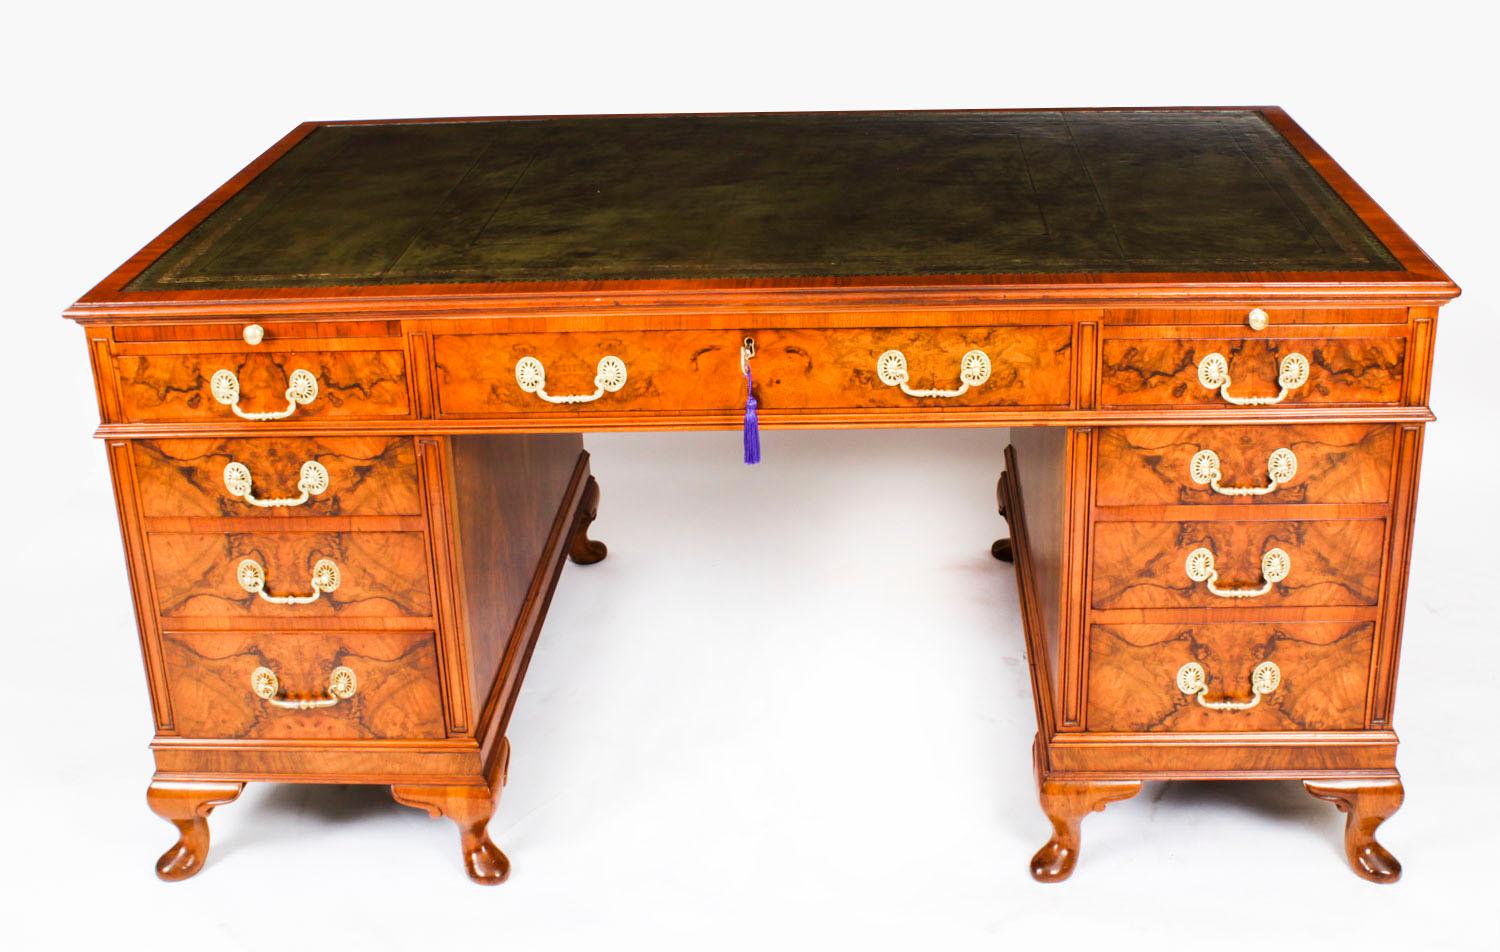 A superb English antique burr walnut partners pedestal desk, dating from Circa 1920.
 
The rectangular top is inset with a stunning gold tooled green leather writing surface.
 
One side of the desk is fitted with three frieze drawers and six